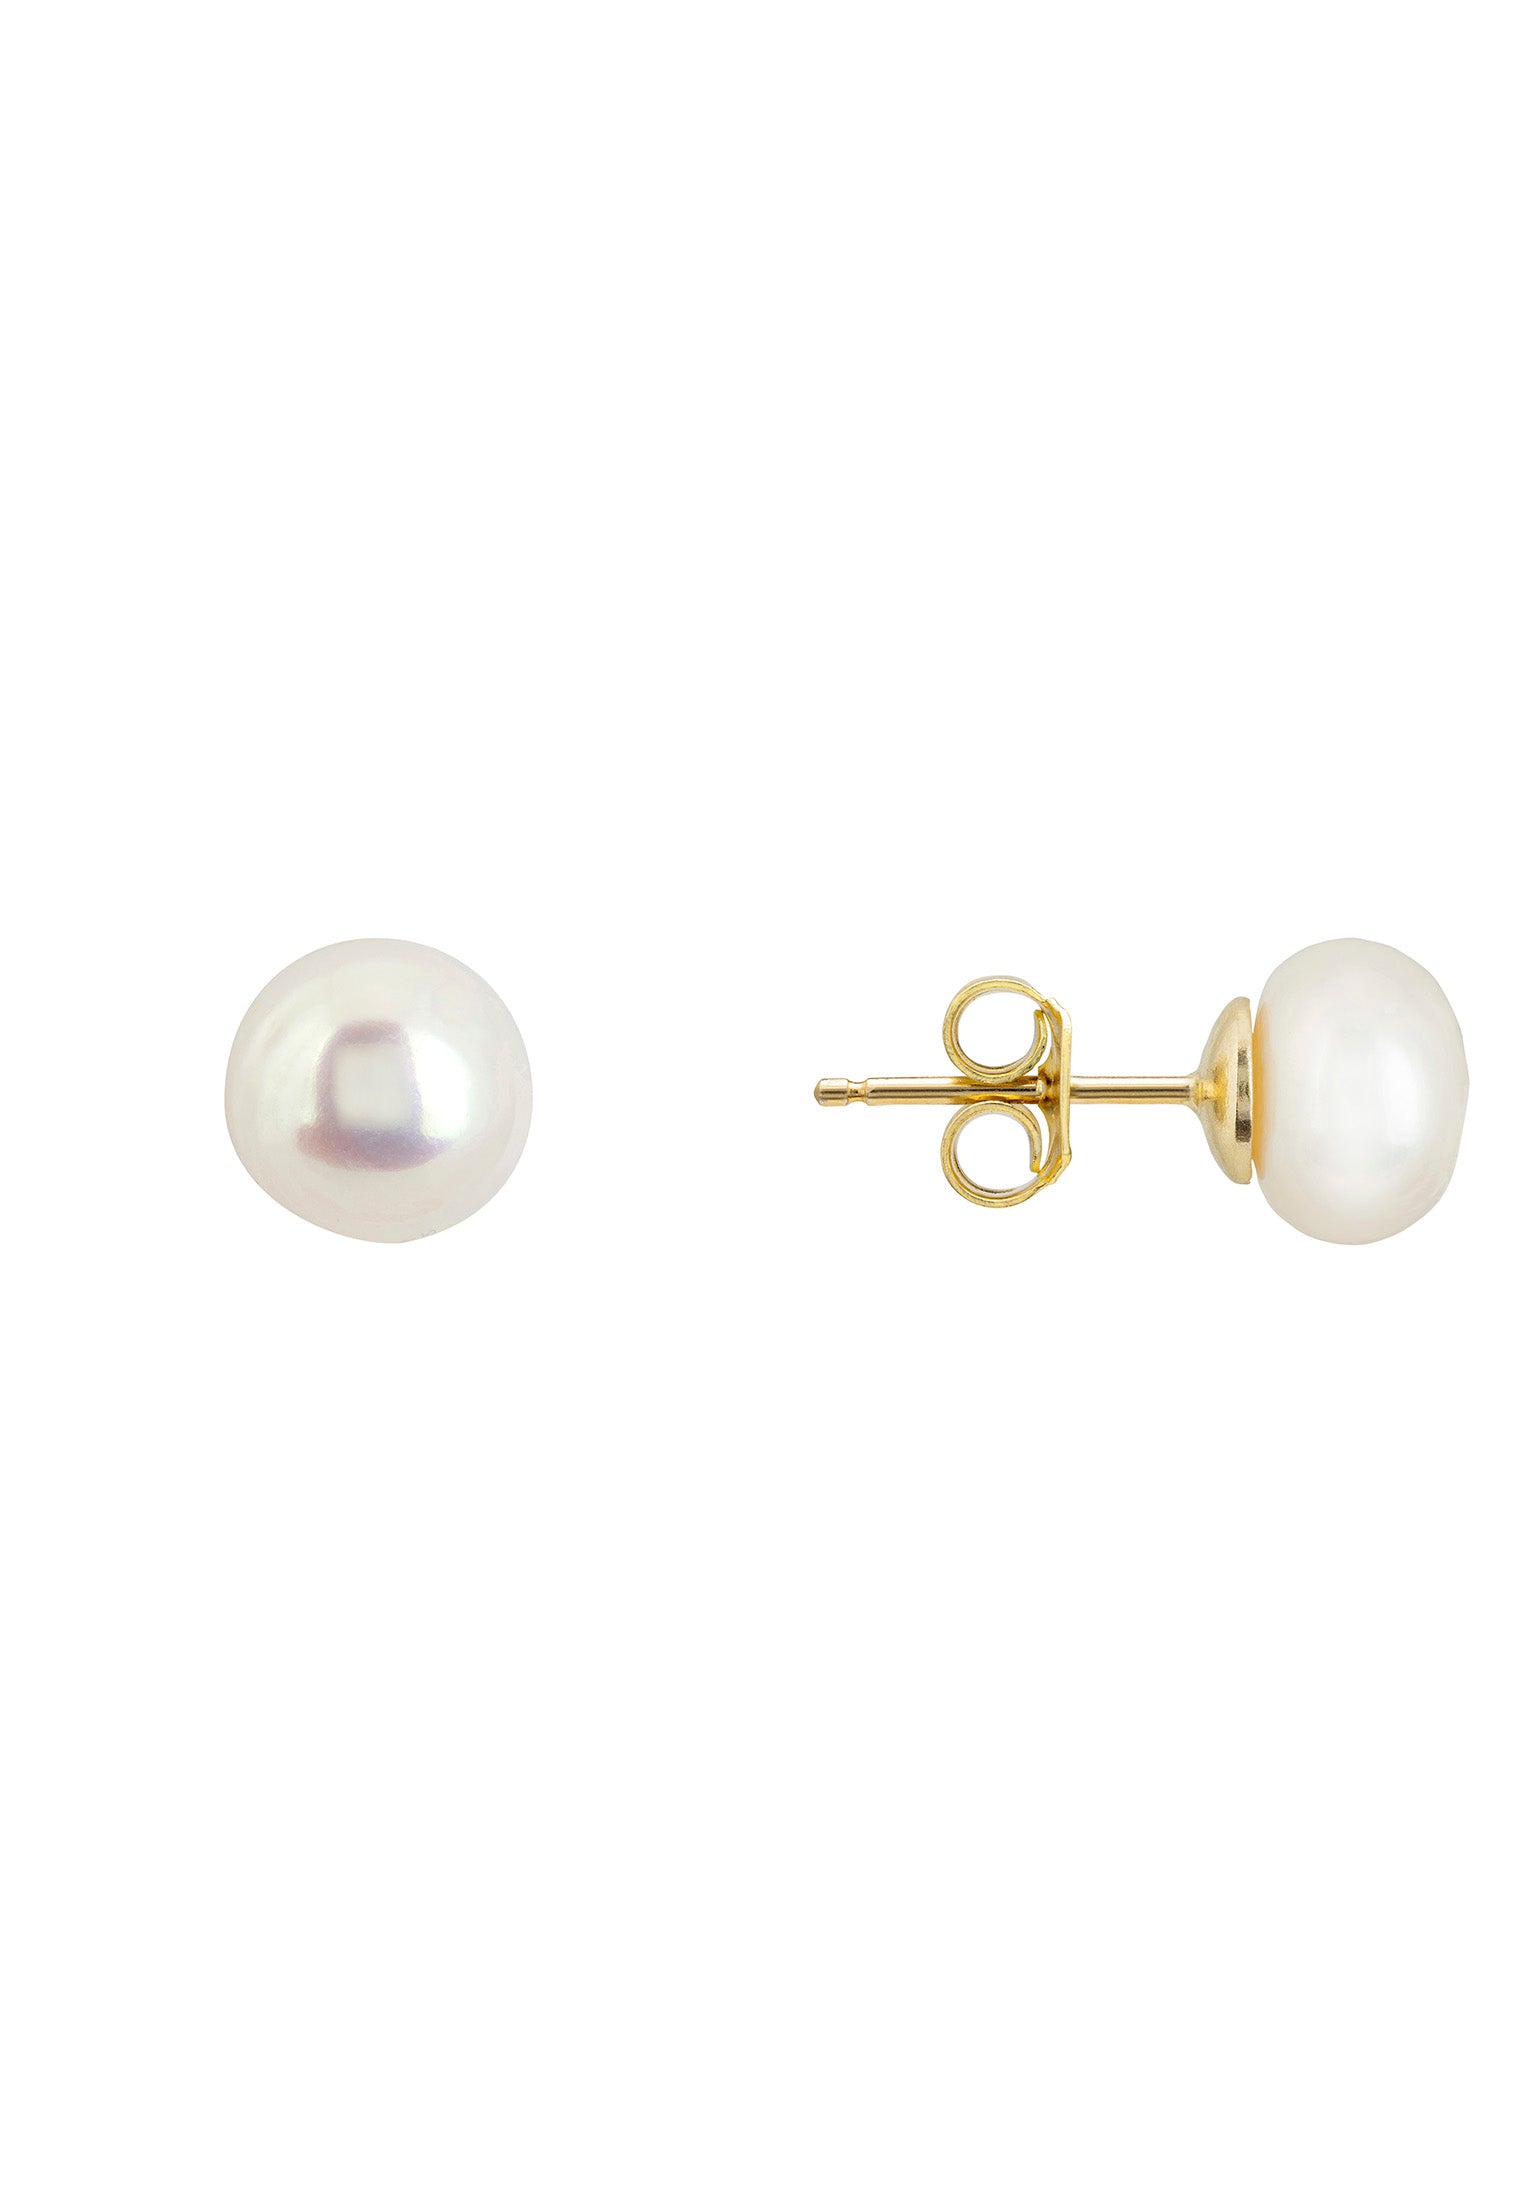 Solid 14K Gold 8mm Classic Natural Pearl Stud Earrings